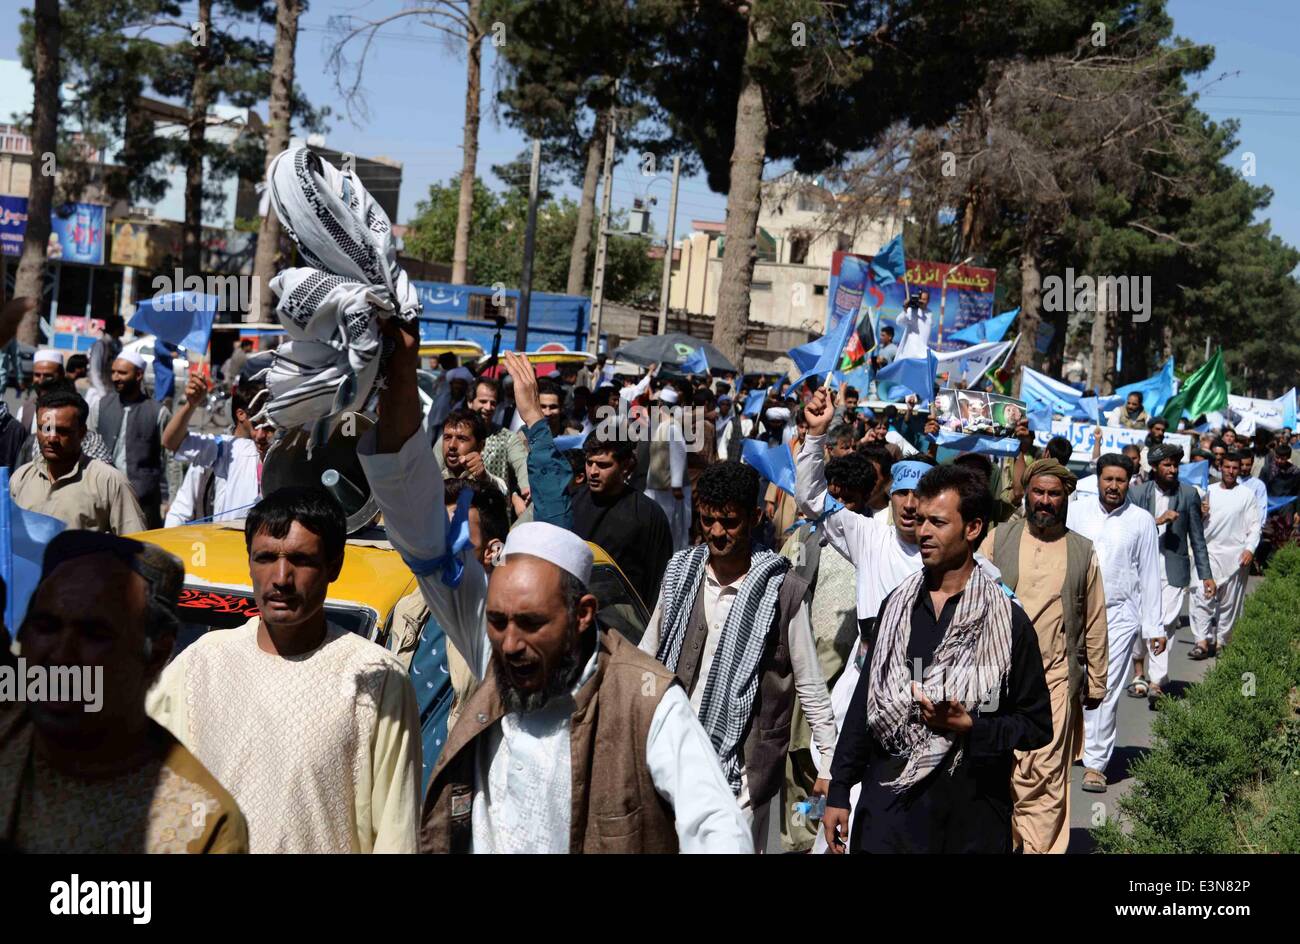 Herat. 24th June, 2014. Afghan protesters shout slogans during a protest against alleged election irregularities and fraud in Herat province in western Afghanistan on June 24, 2014. © Sardar/Xinhua/Alamy Live News Stock Photo